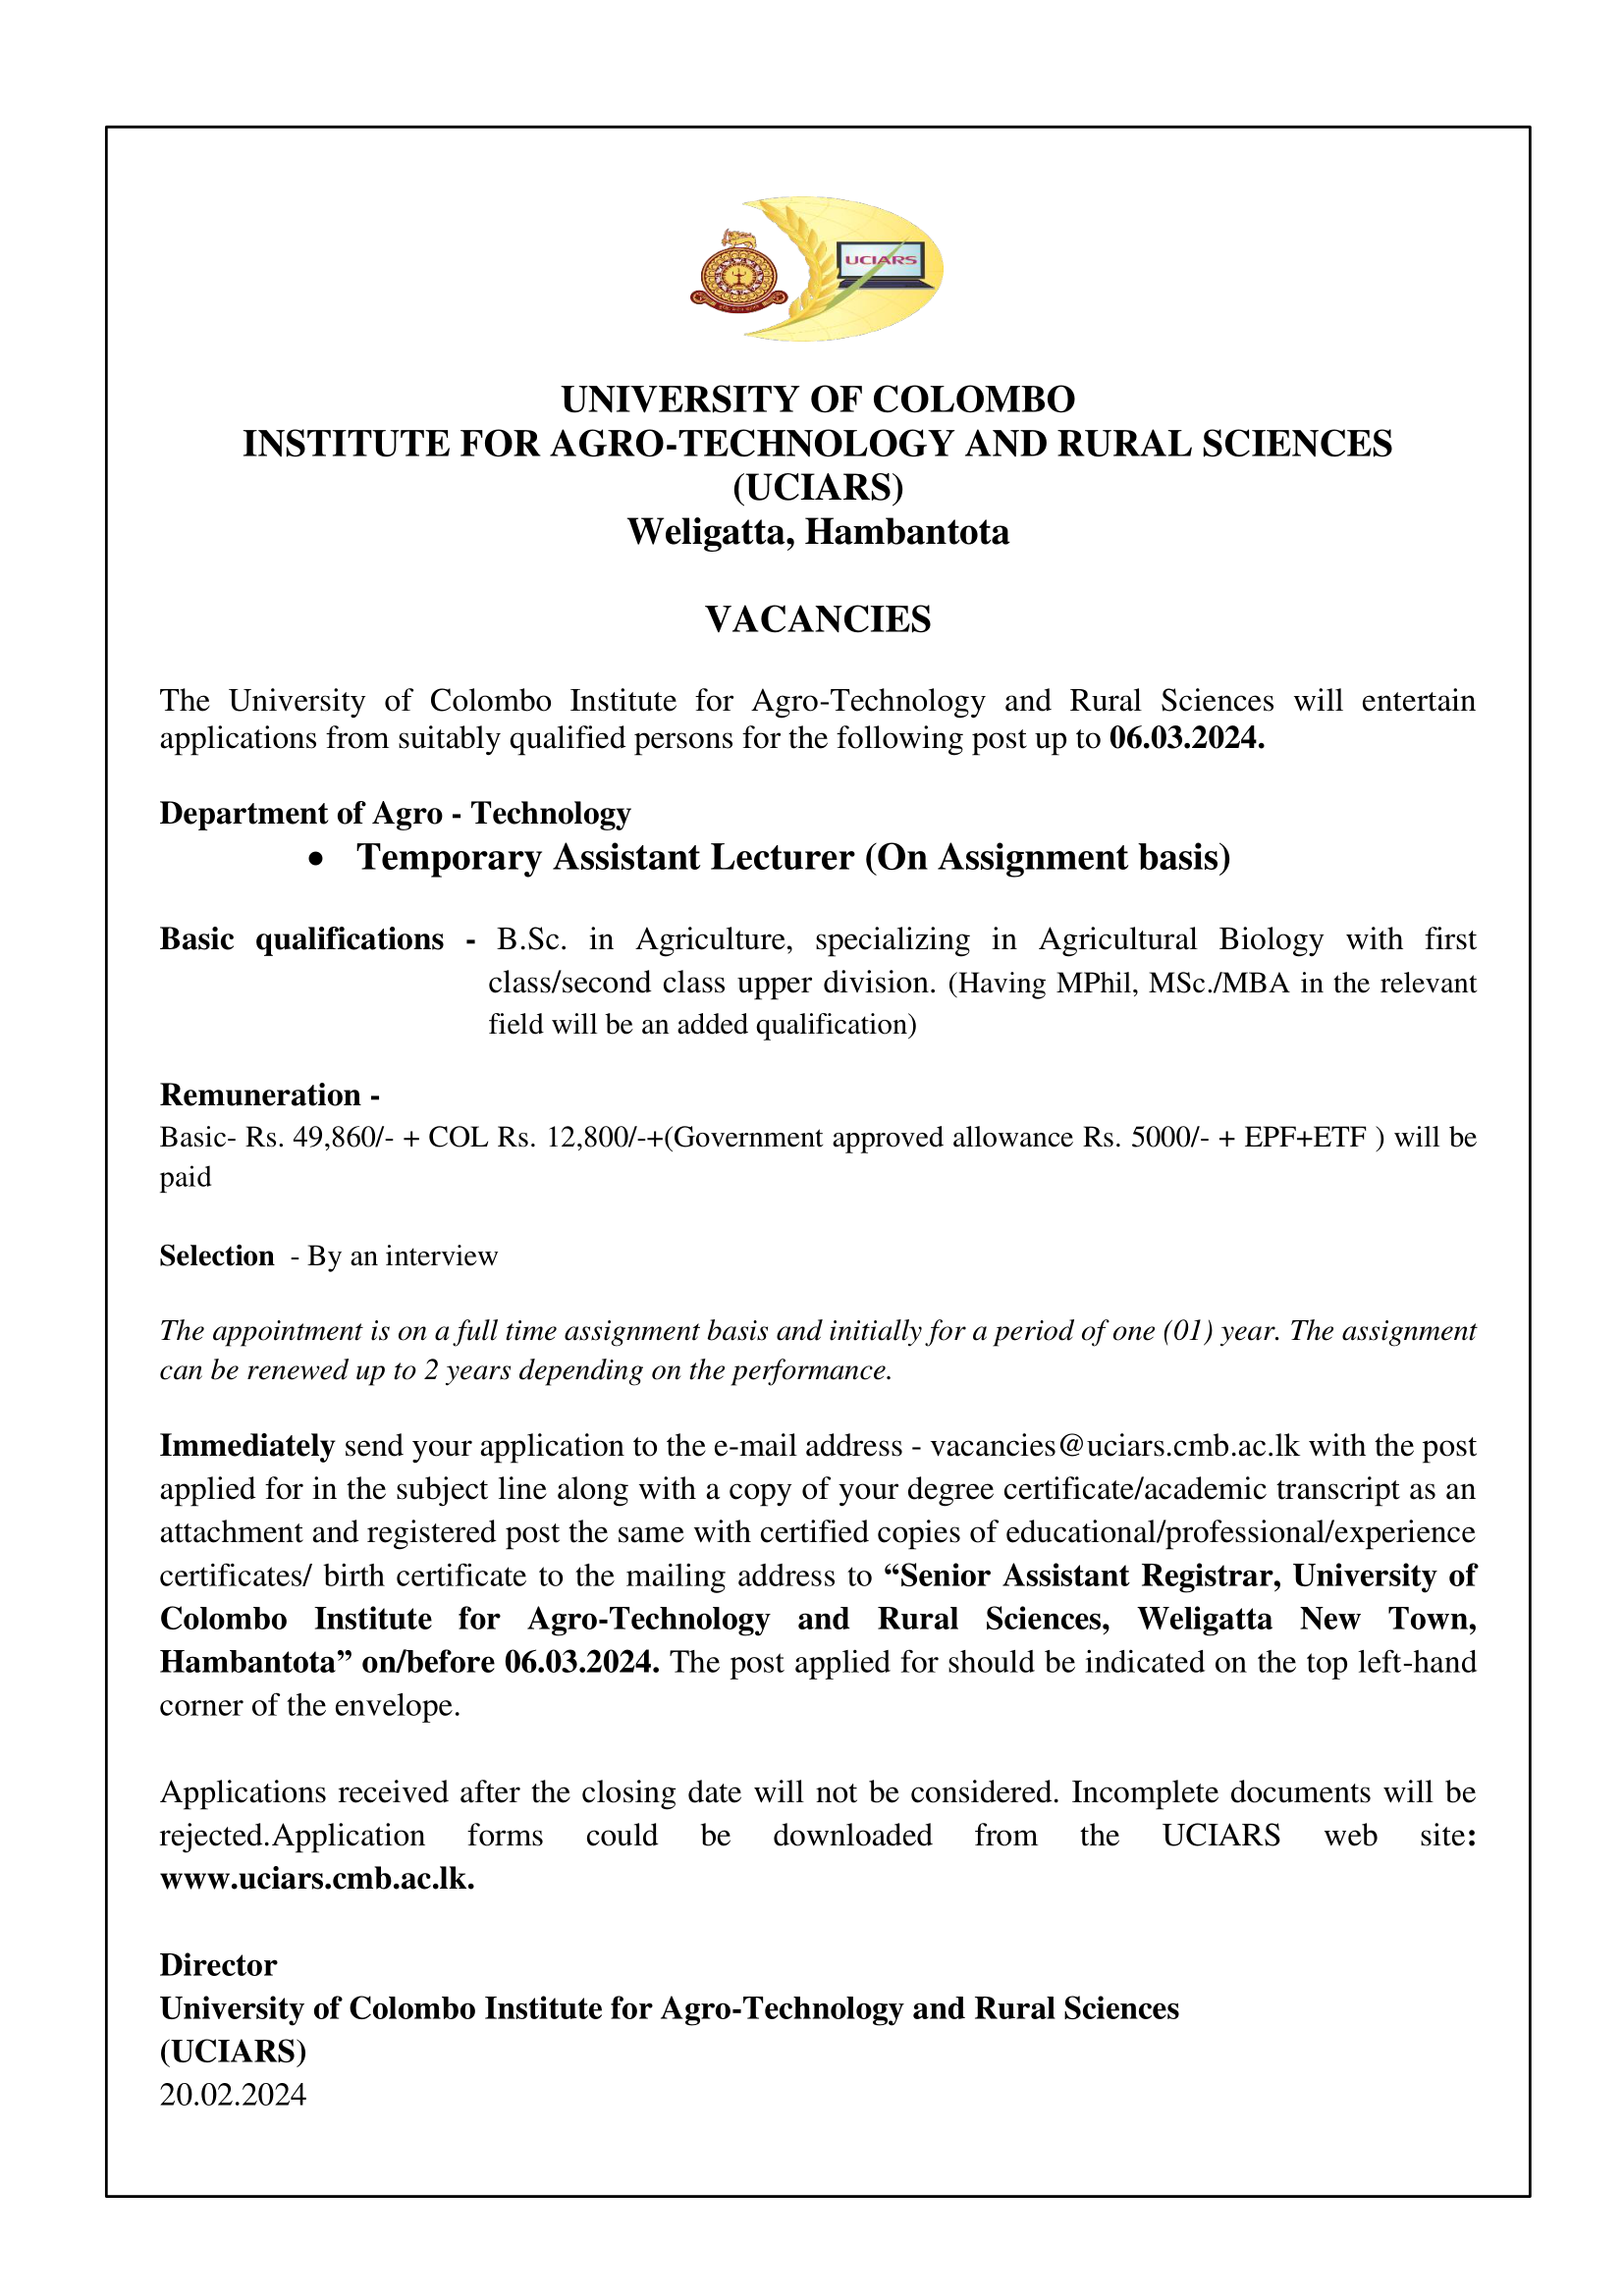 Vacancy – Temporary Assistant Lecturer